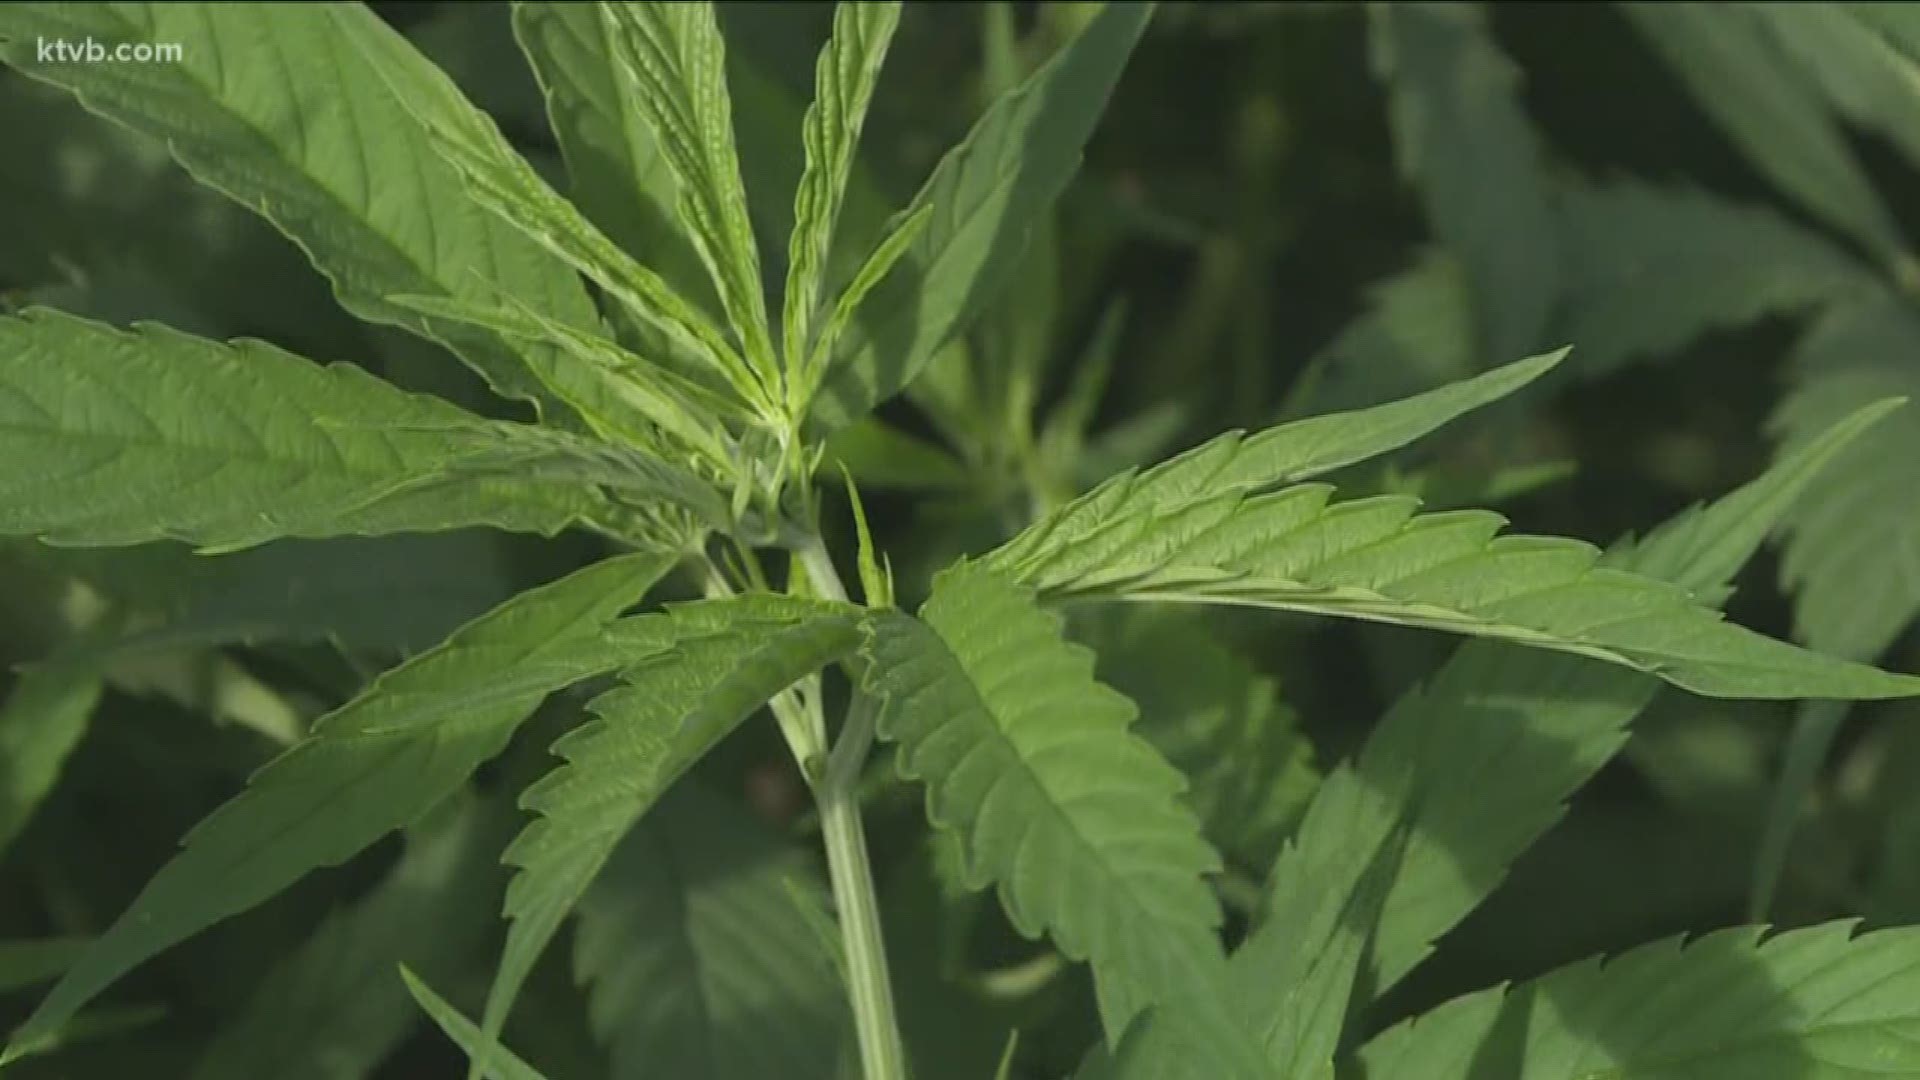 A new federal law is causing some confusion as to whether hemp is legal in Idaho.